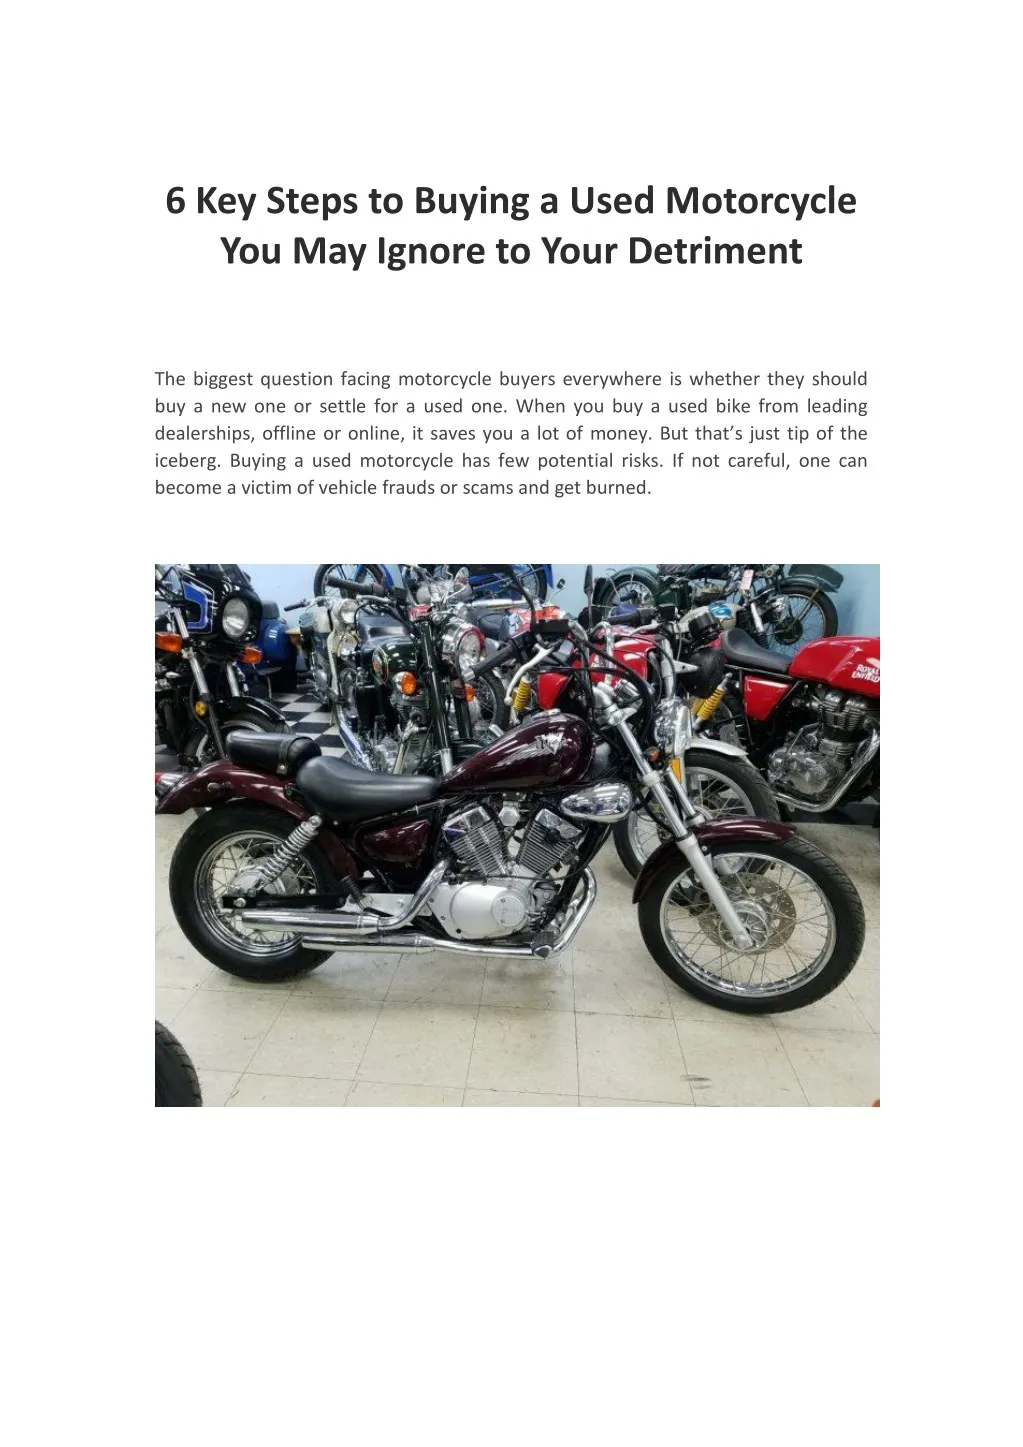 6 key steps to buying a used motorcycle